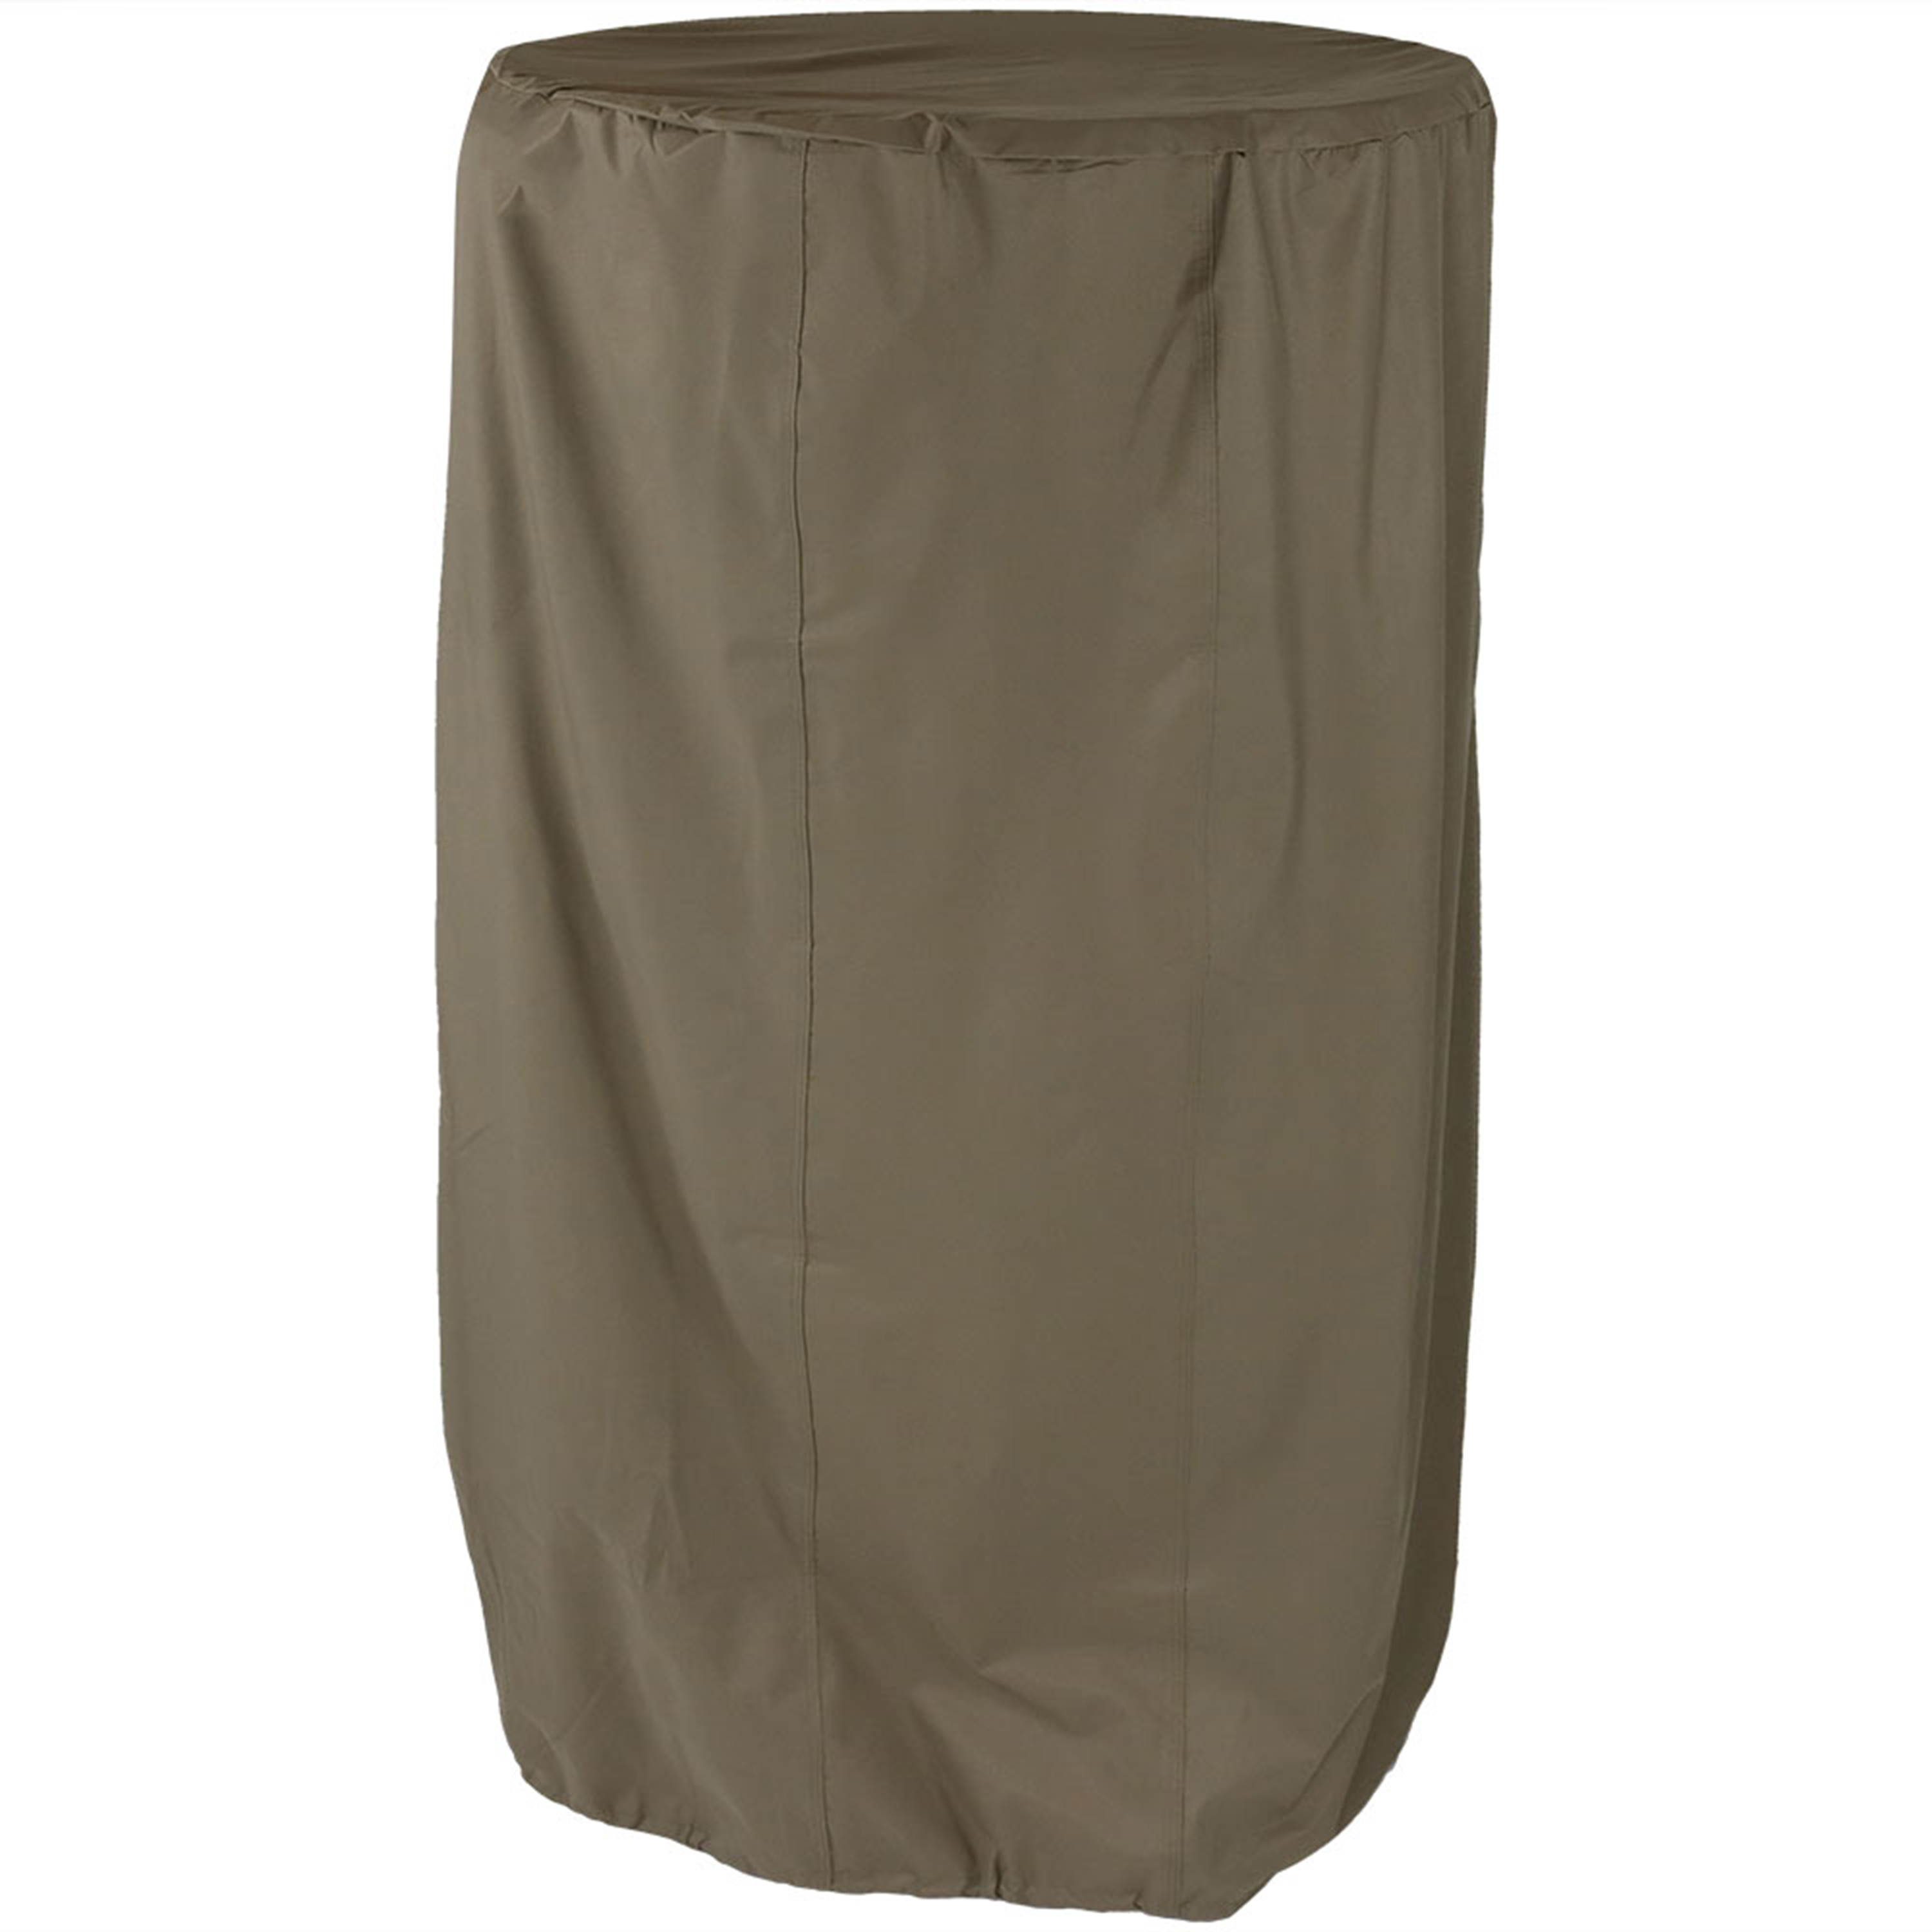 Sunnydaze Outdoor Water Fountain Cover, Khaki, Size Options Available, 38-inch x 70-inch